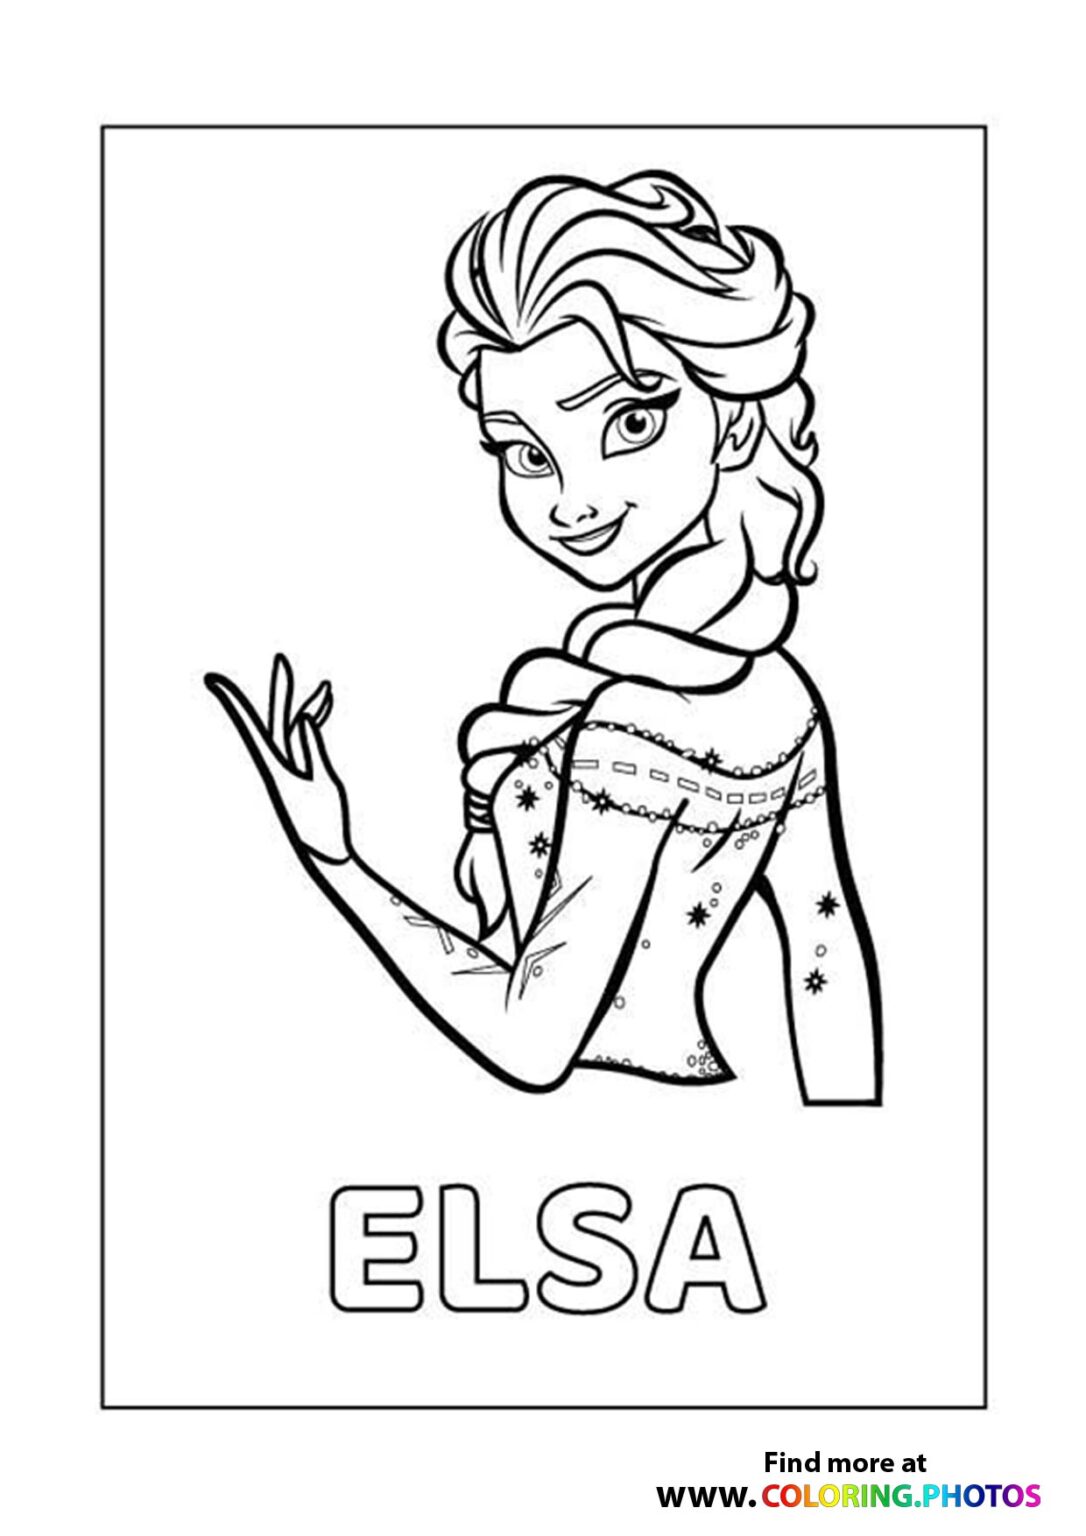 Mirabel's sister - Encanto - Coloring Pages for kids